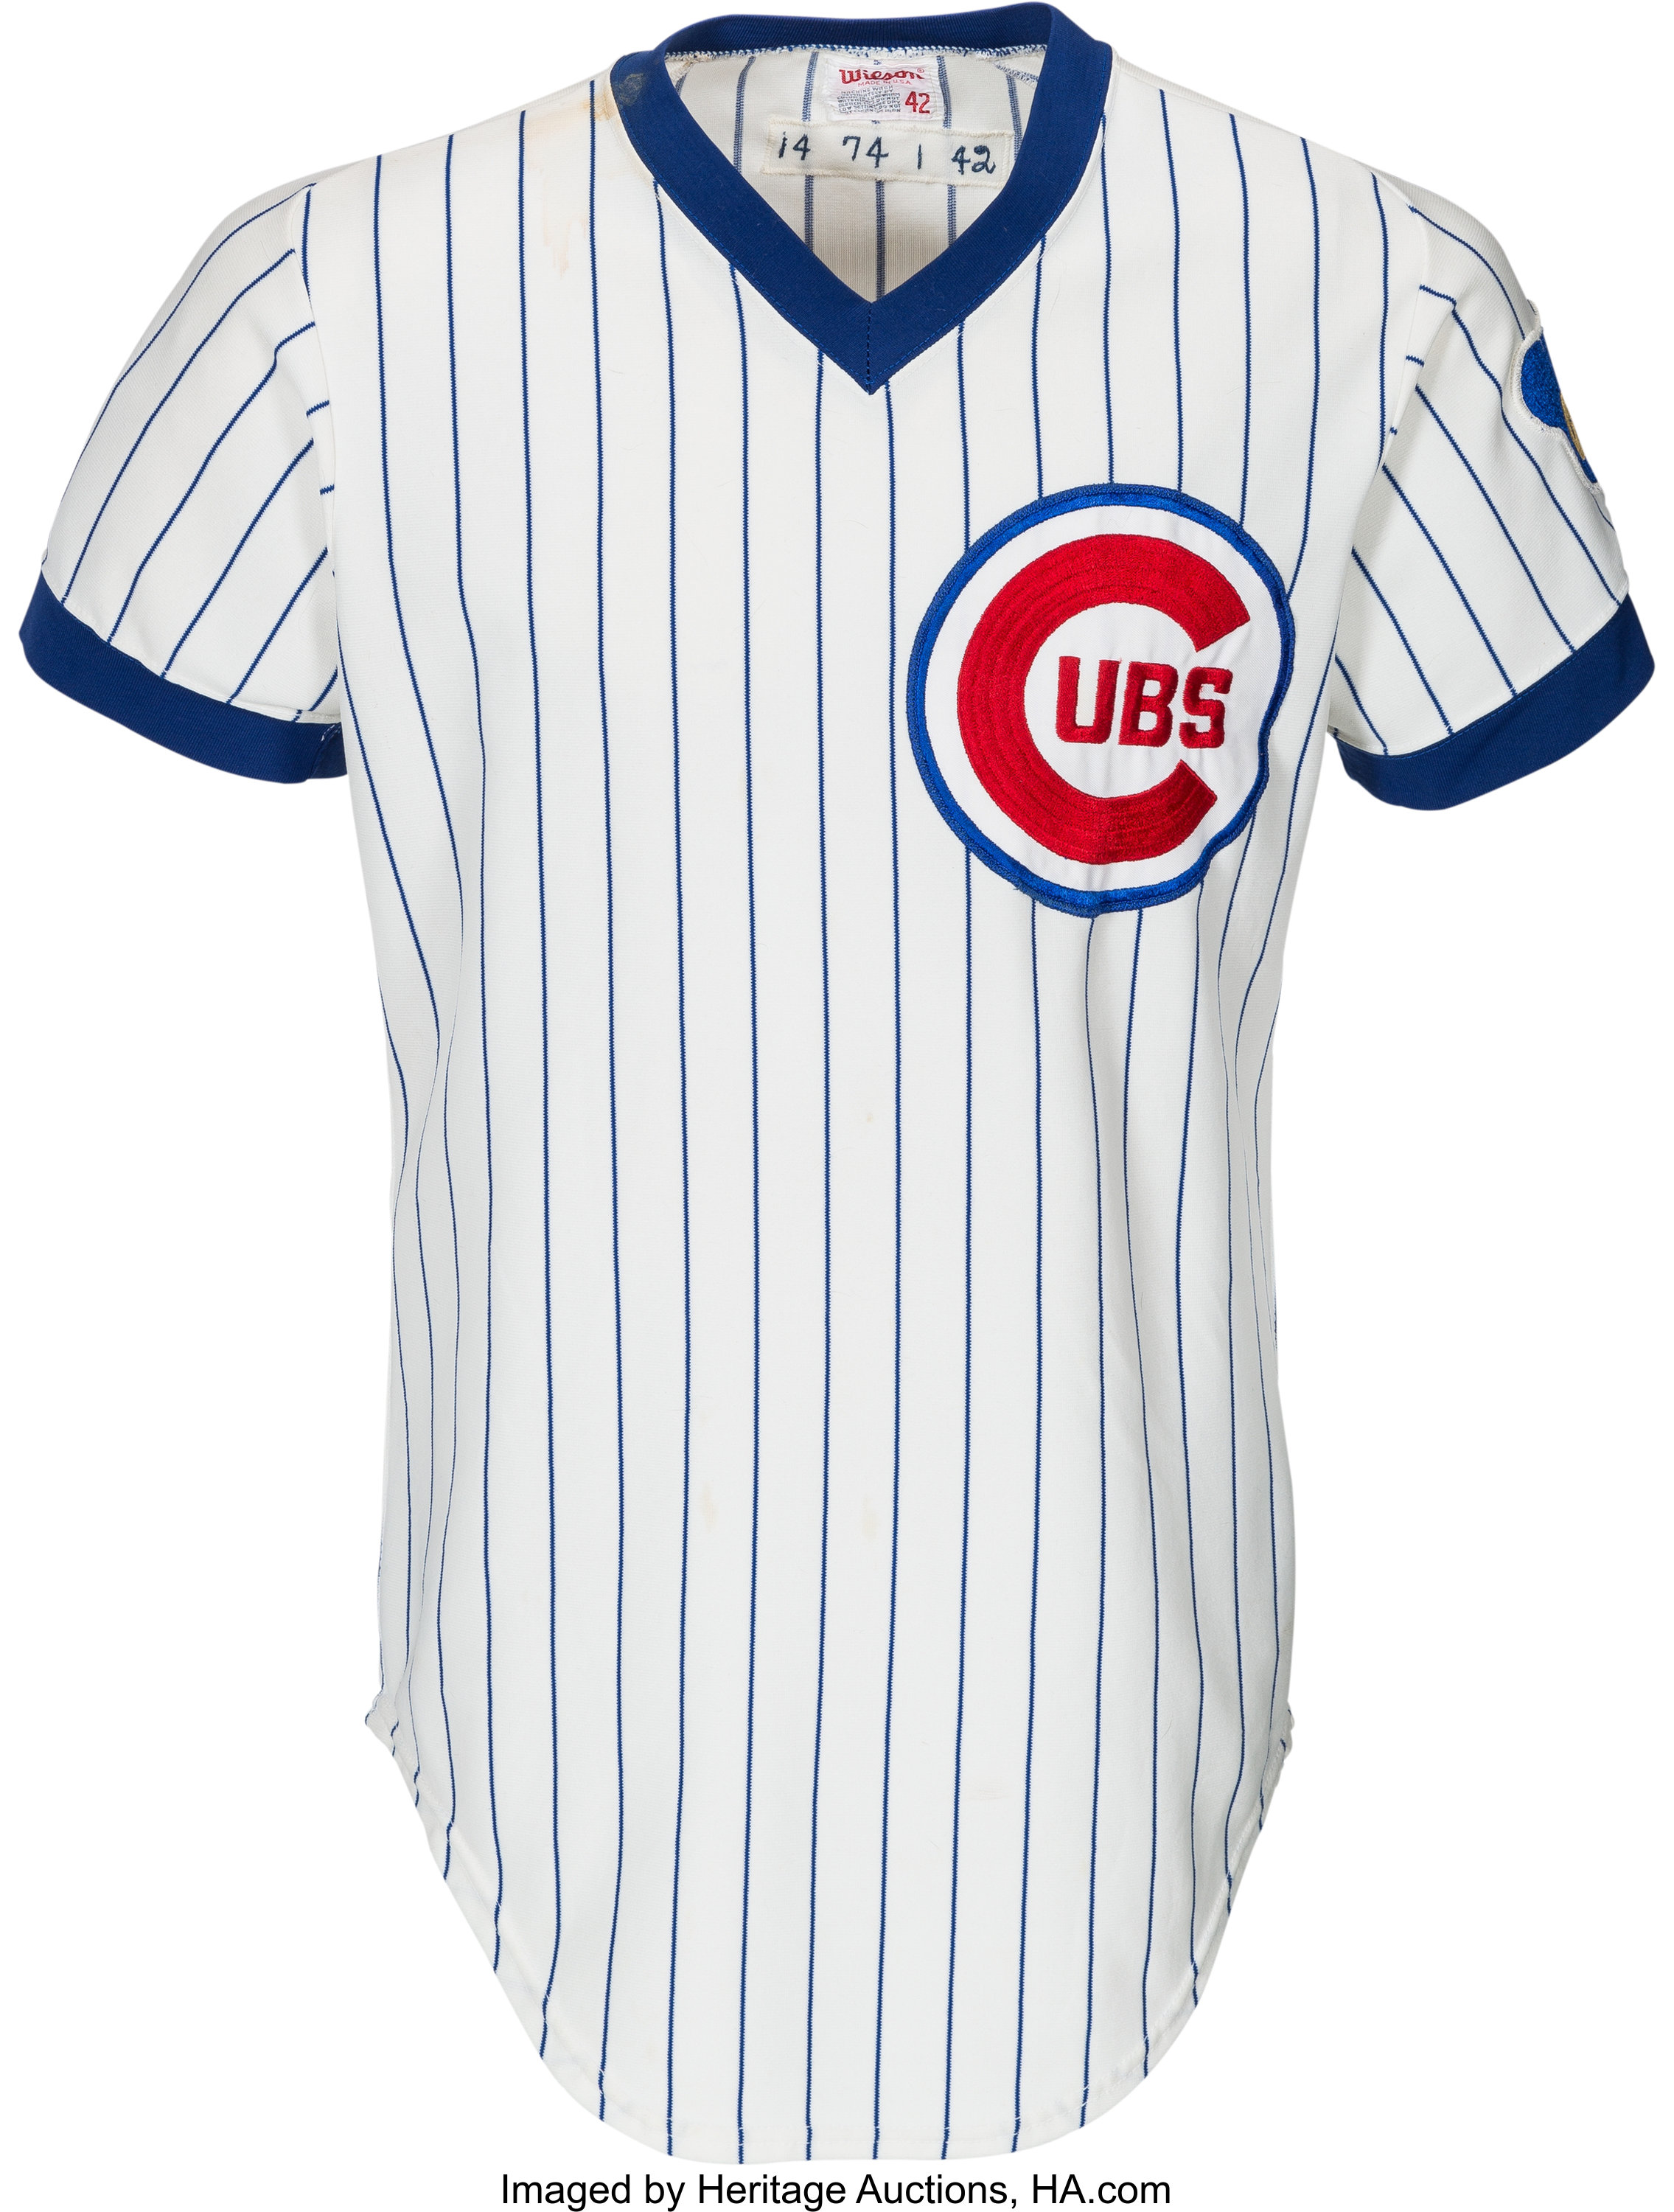 1974 Ernie Banks Game Worn Chicago Cubs Coach's Jersey.